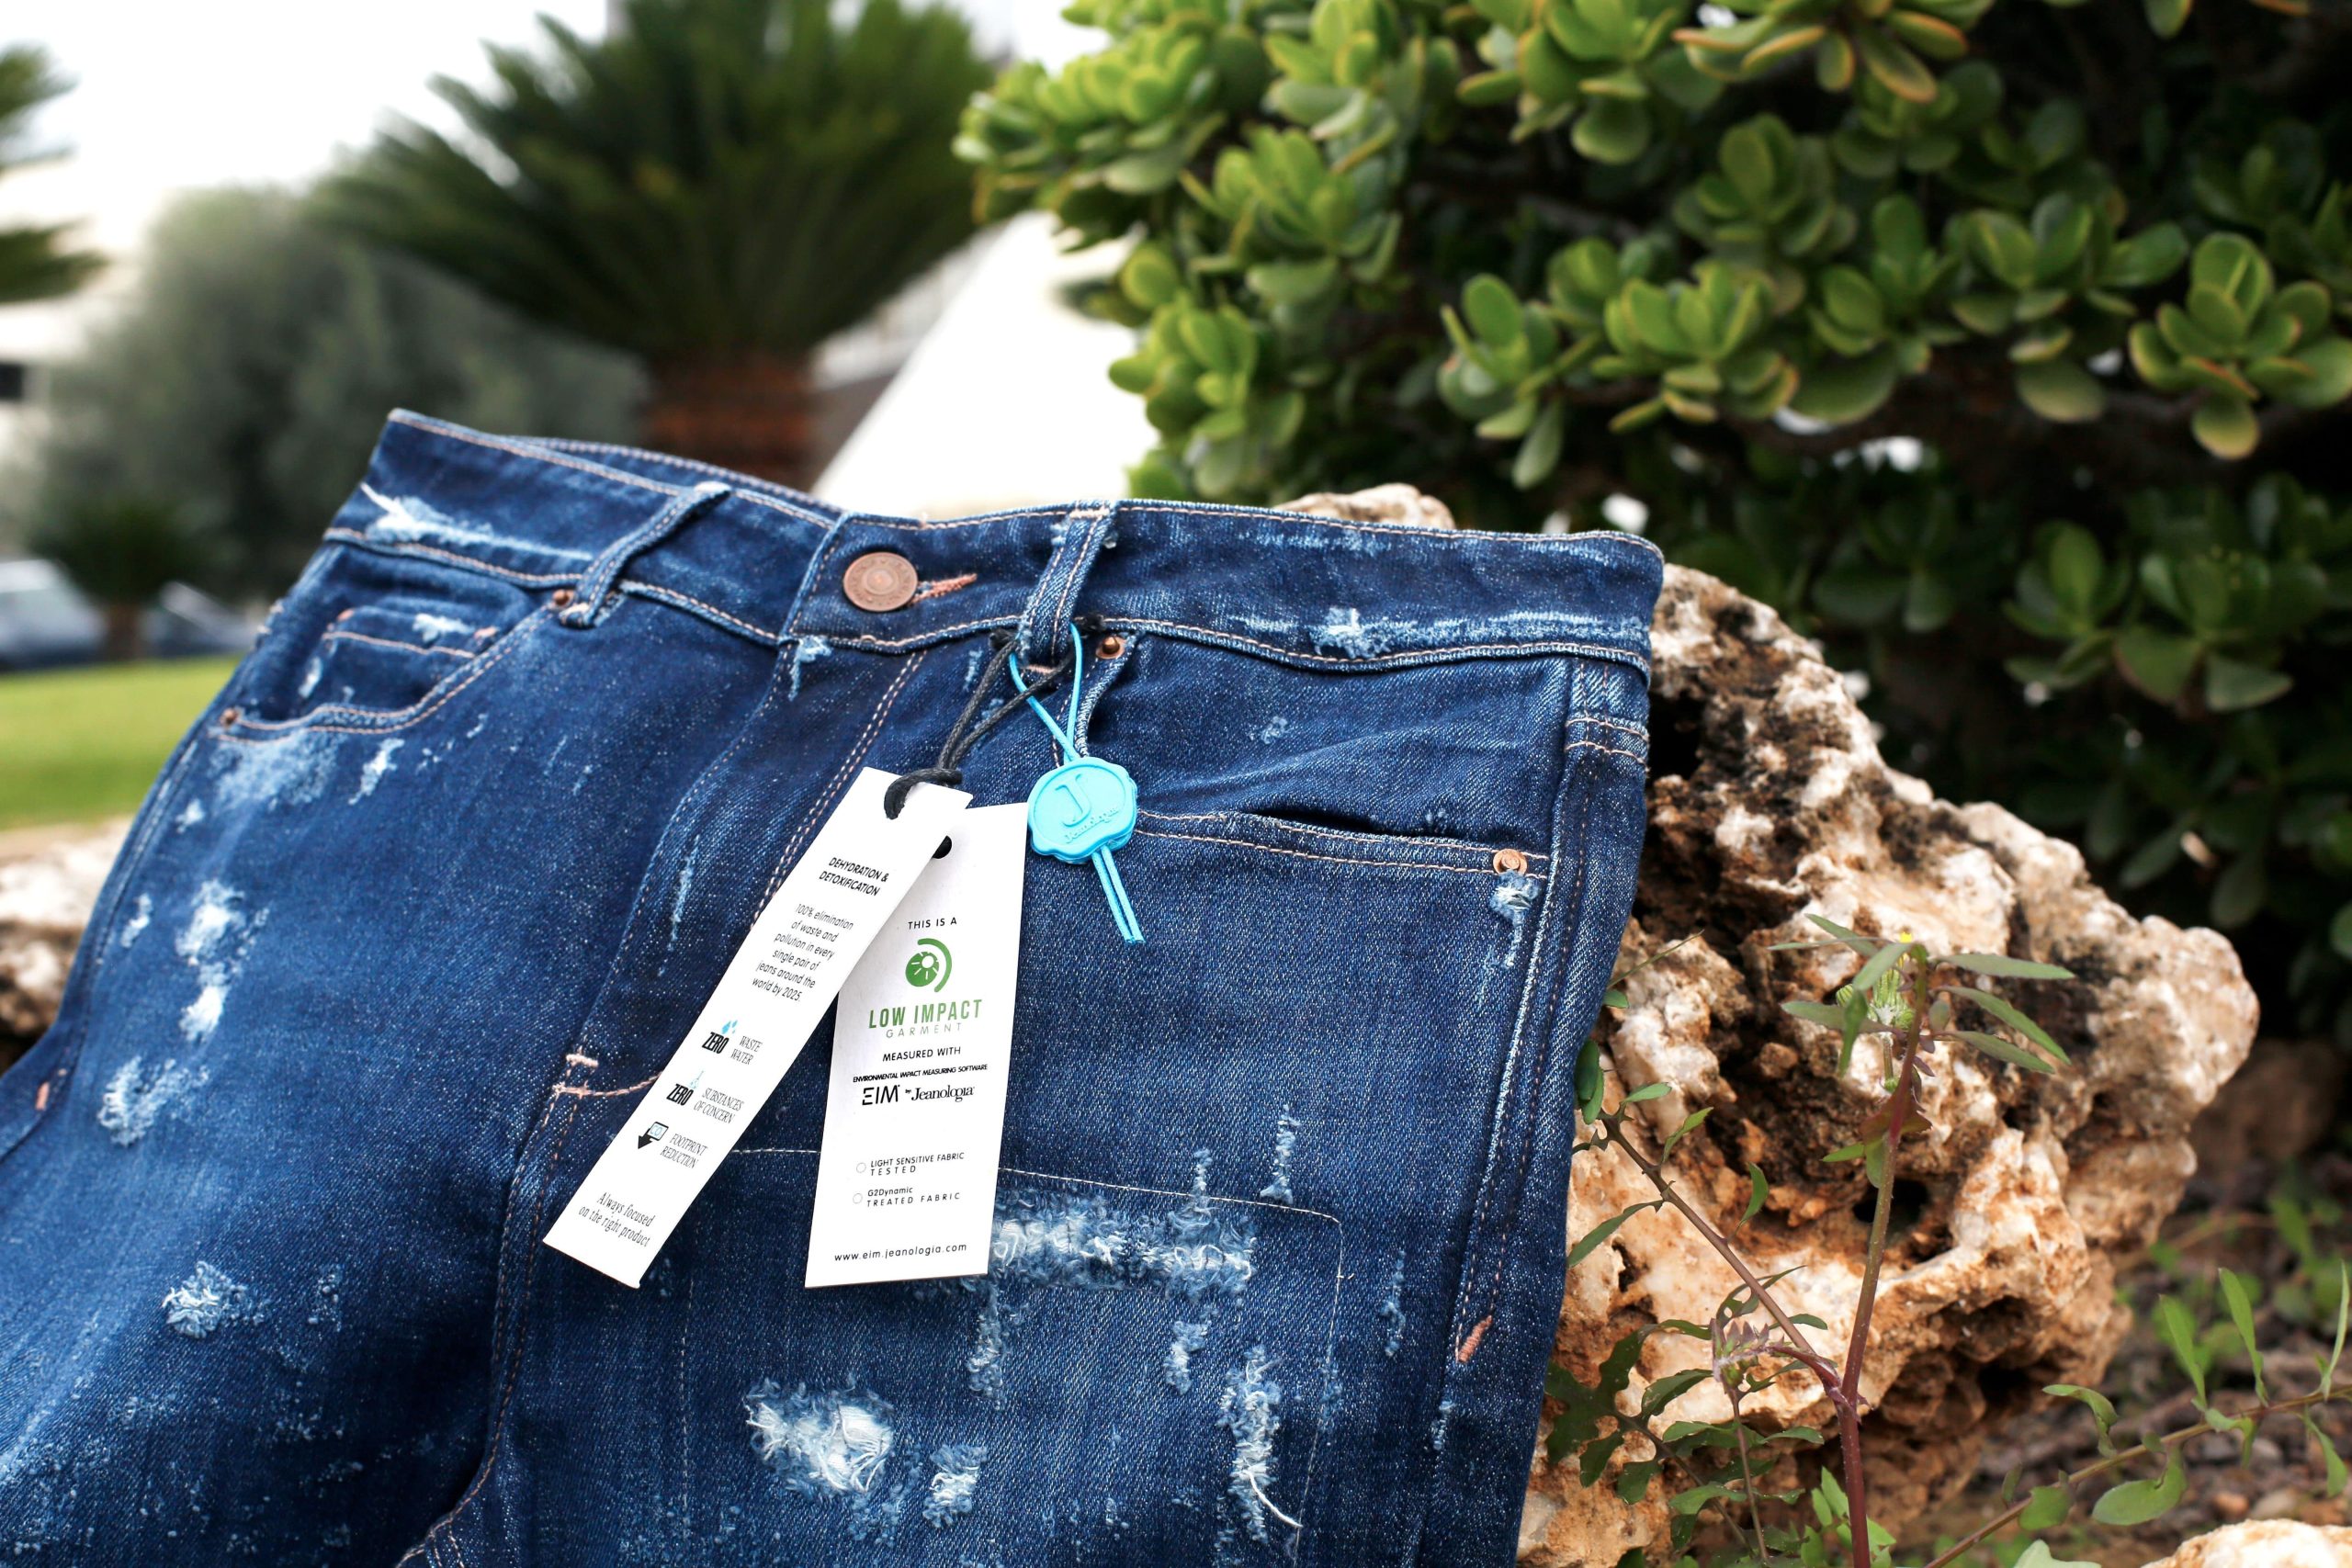 Jeanologia reduces water consumption in garment manufacturingAs part of Jeanologia's MissionZero project, the Spanish company aims to eliminate ...